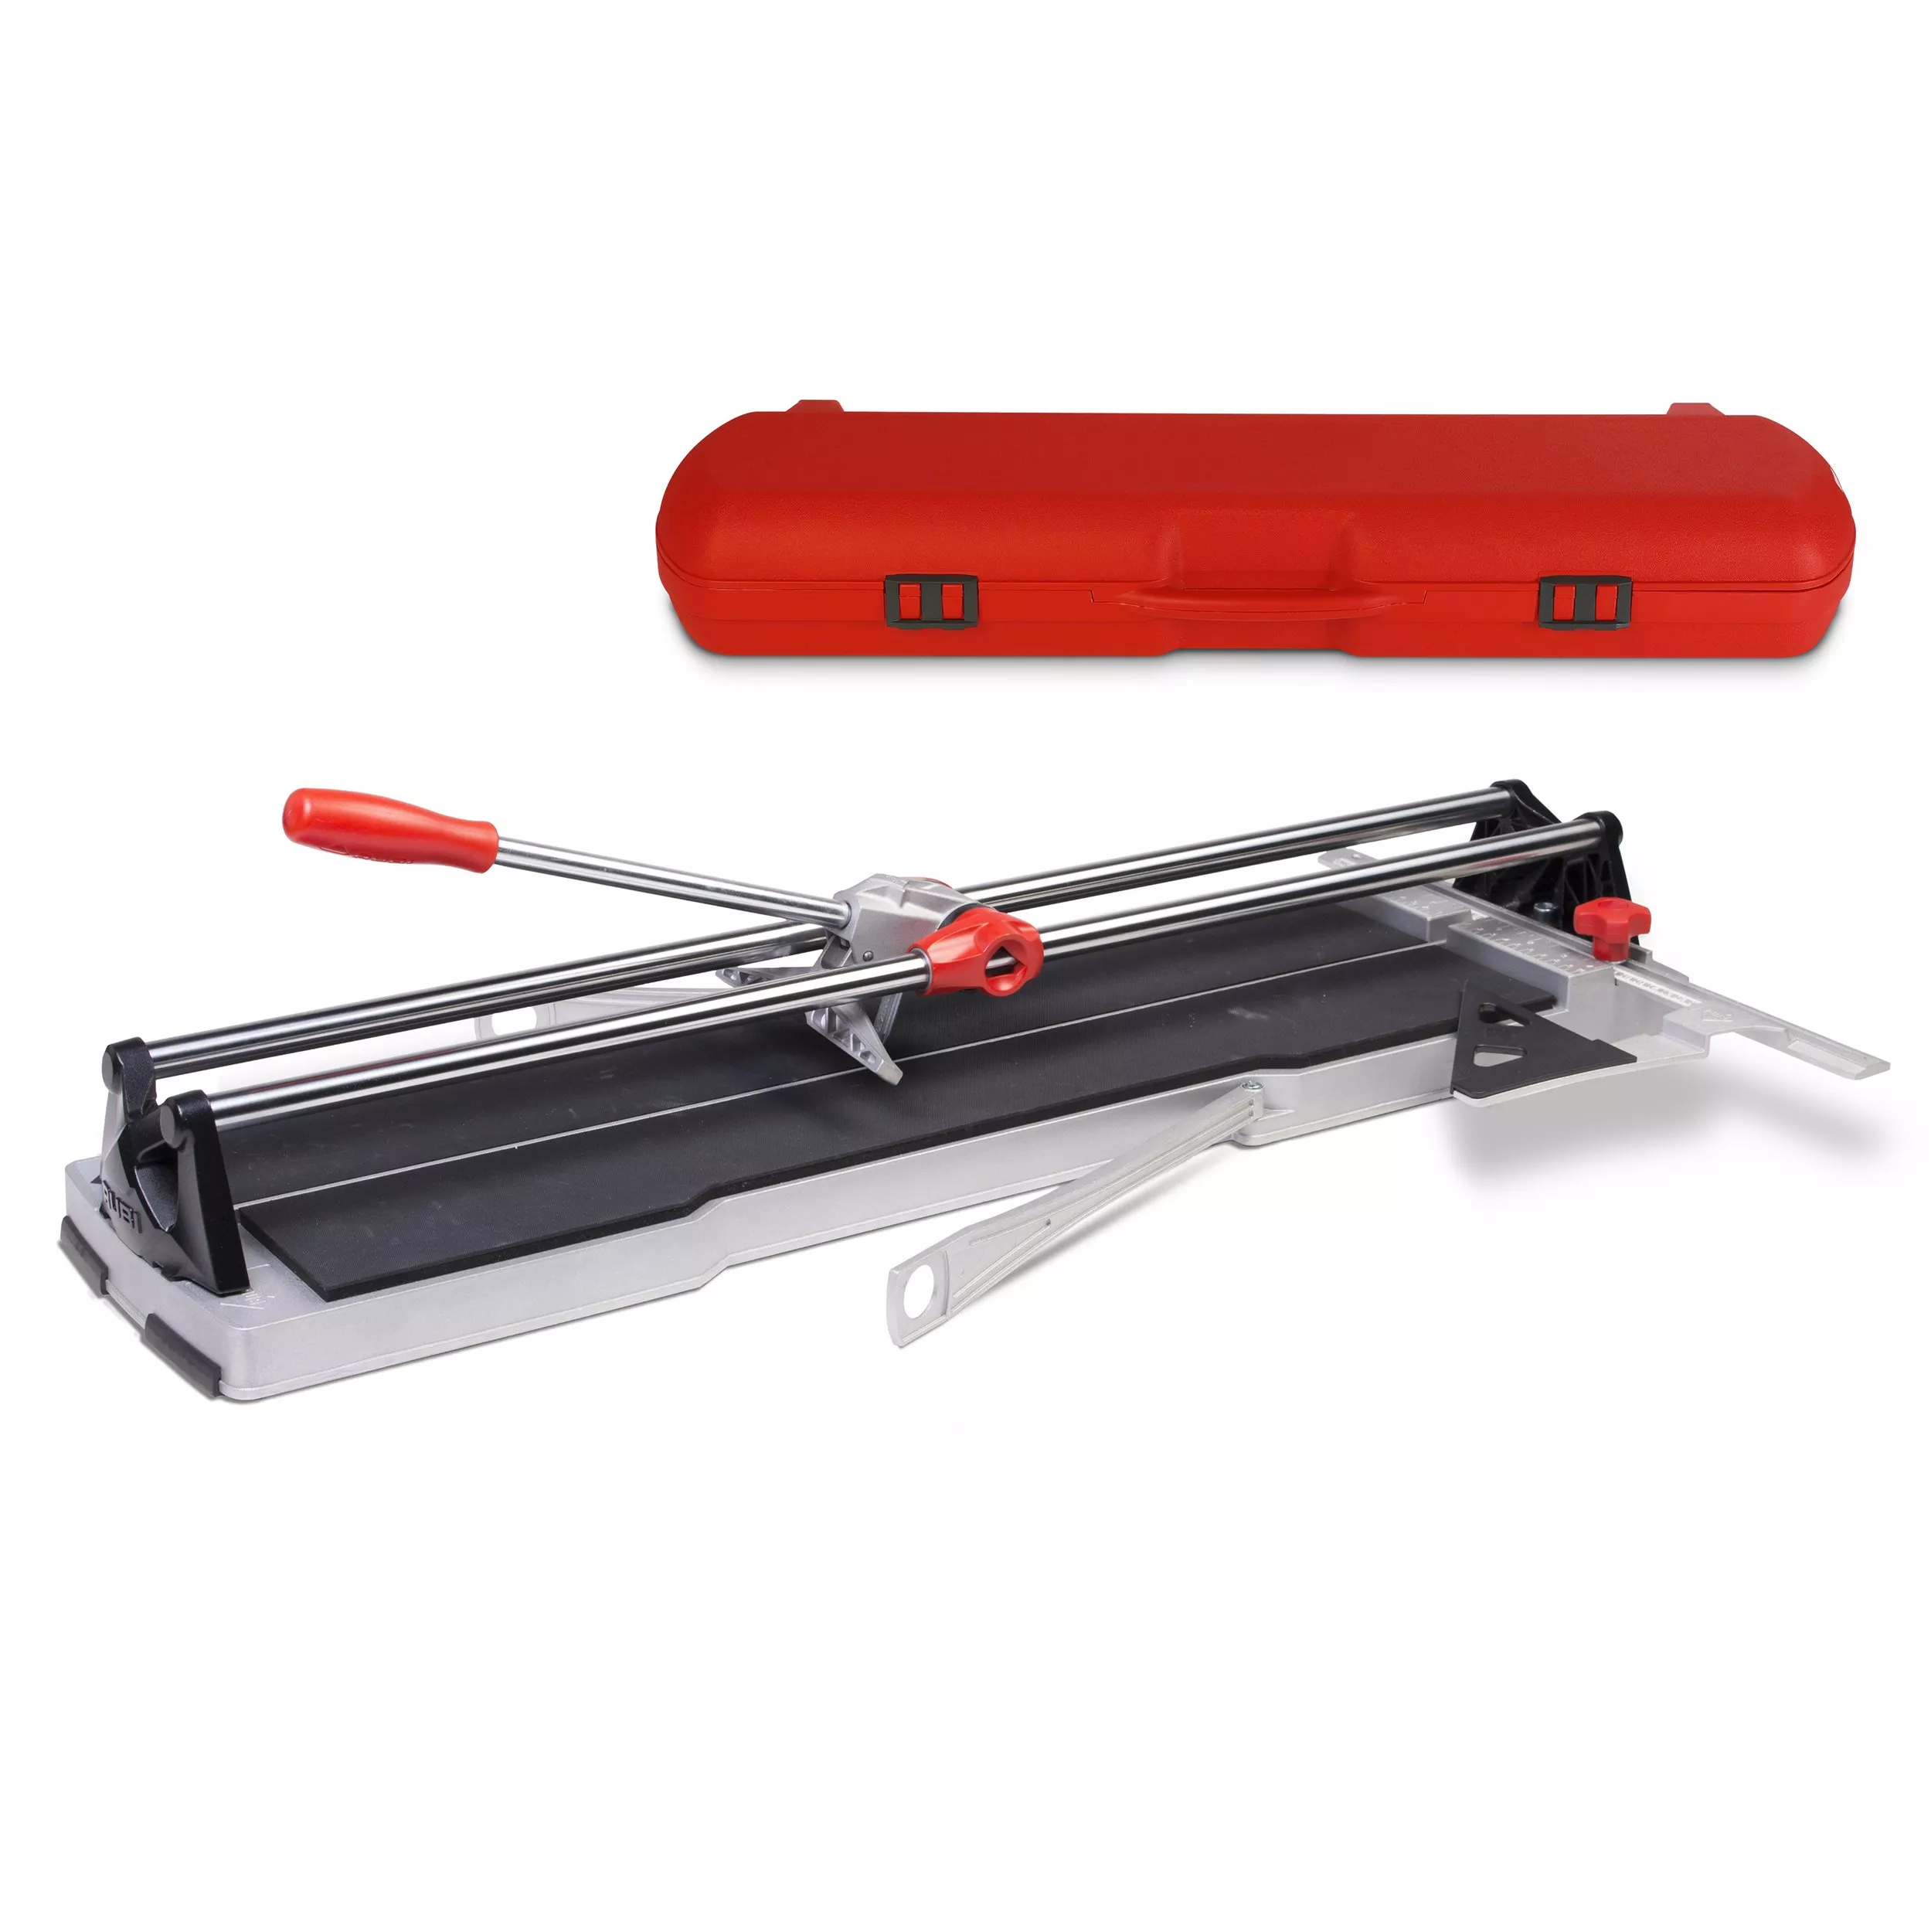 Rubi 28in. Manual Cutter with Carrying Case